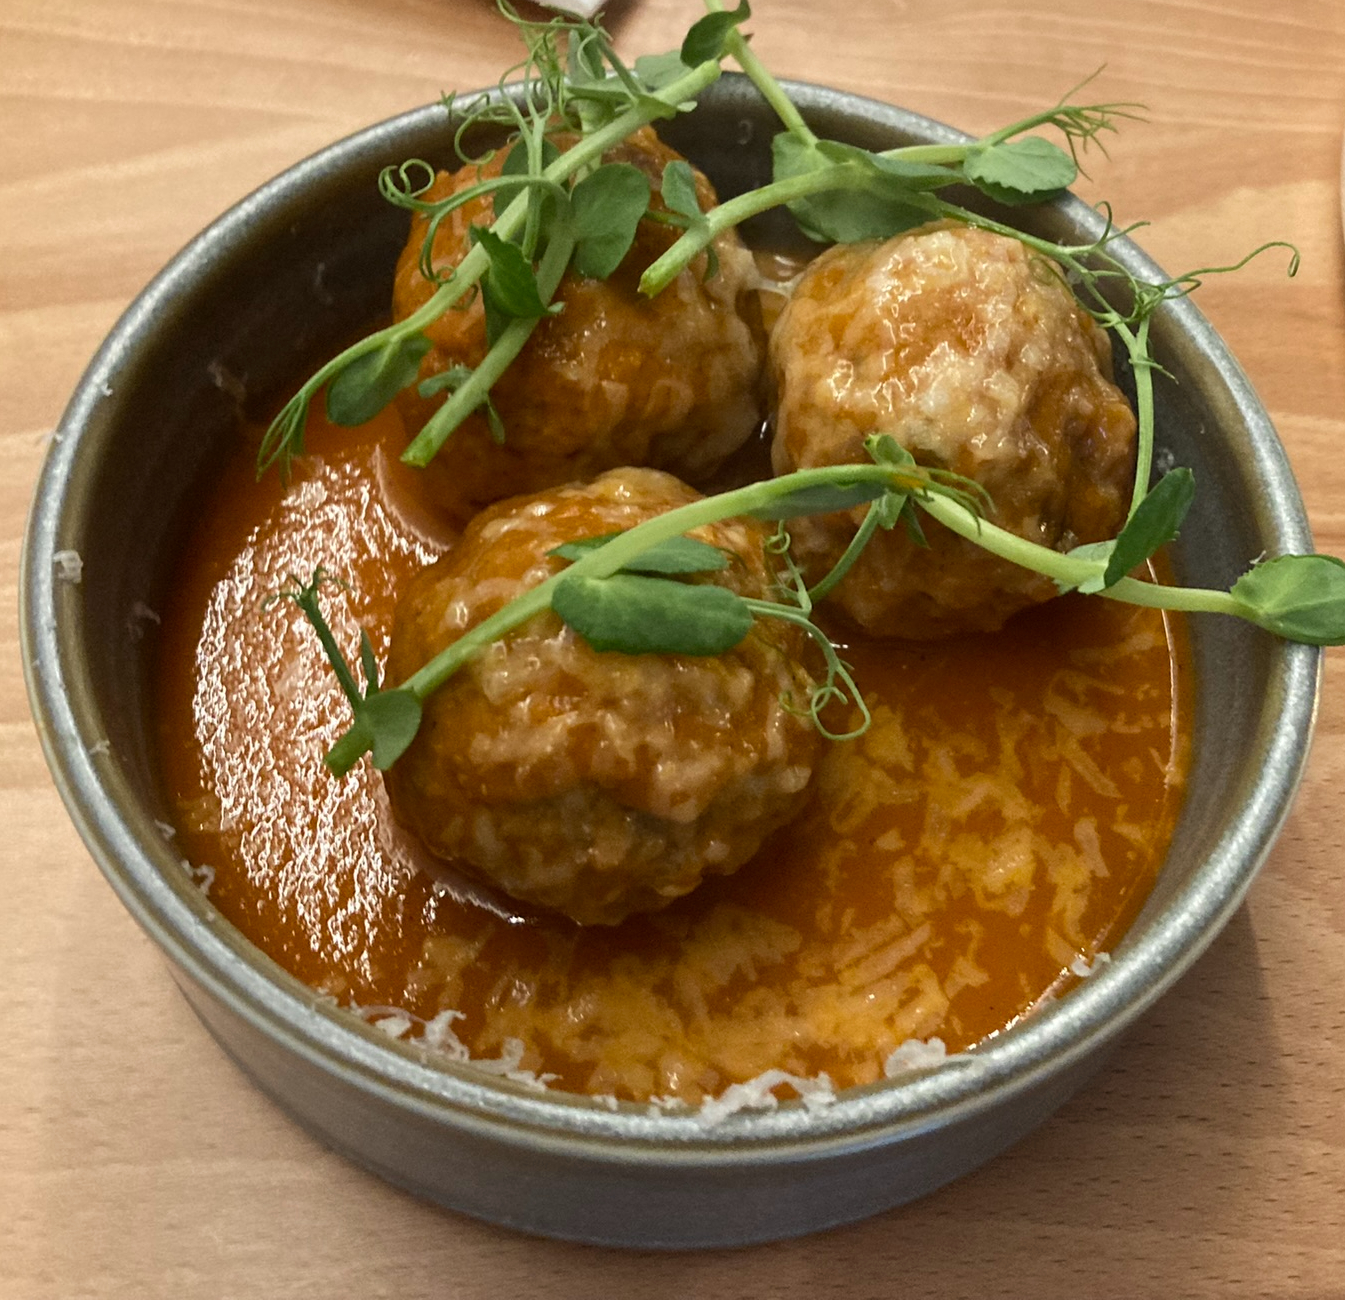 Albondigas, which translates from Spanish as meatballs